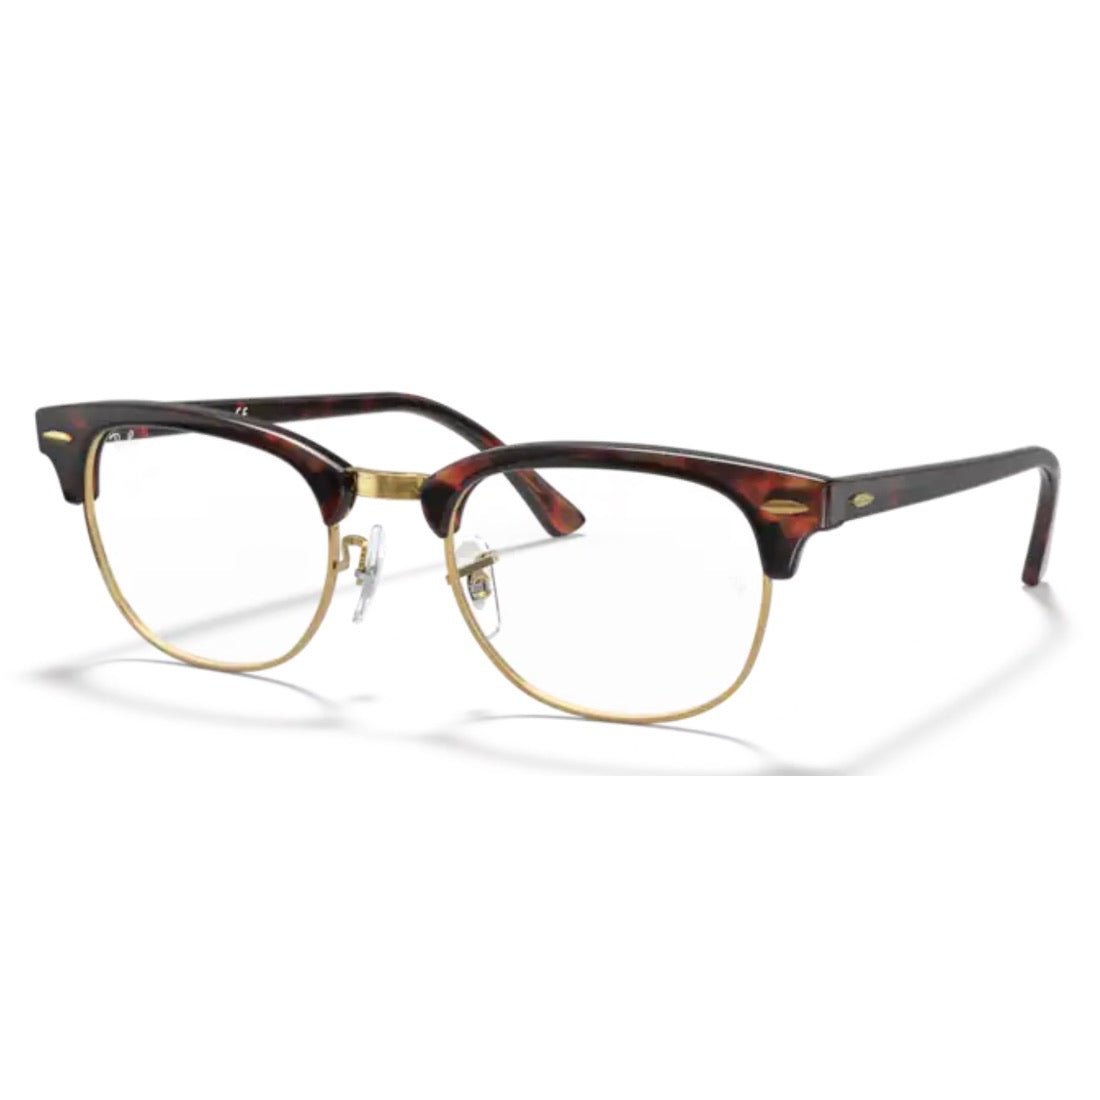 RAY-BAN - RX5154 8058 - Clubmaster - PARIS LUNETIER